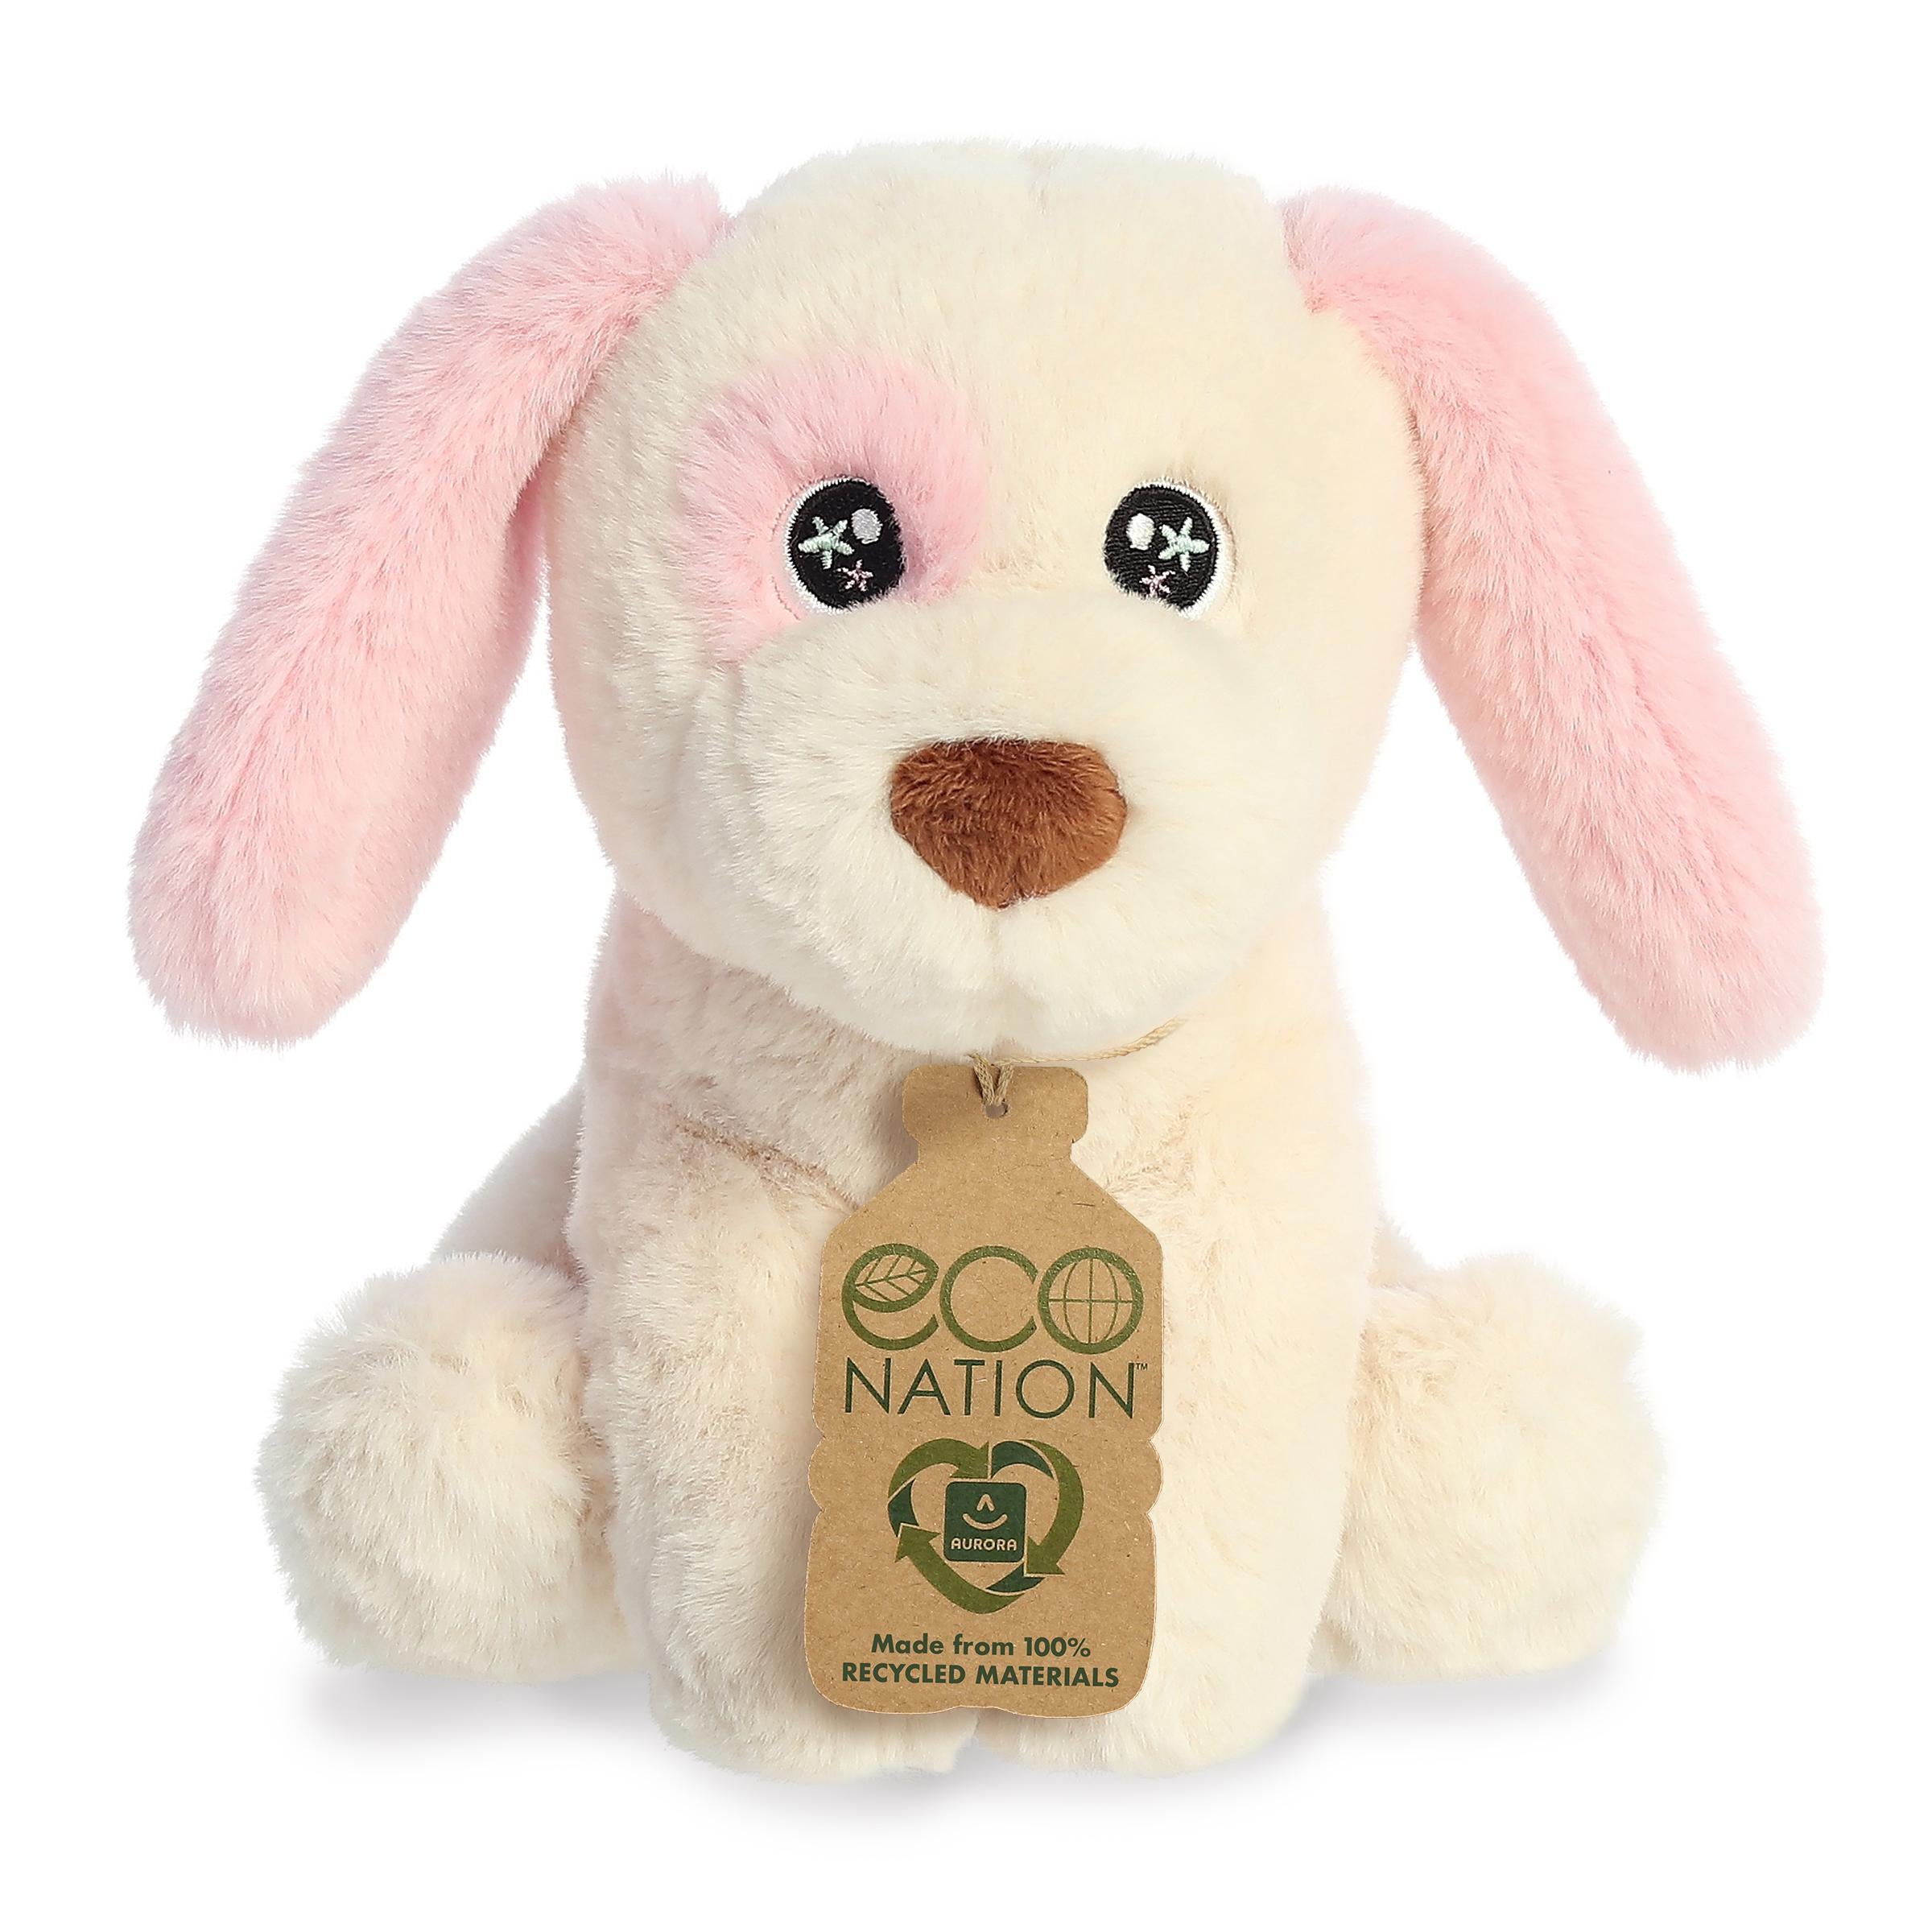 Delightful puppy plush the color of a peach, with sparkling embroidered eyes and an eco-nation tag hanging from its neck